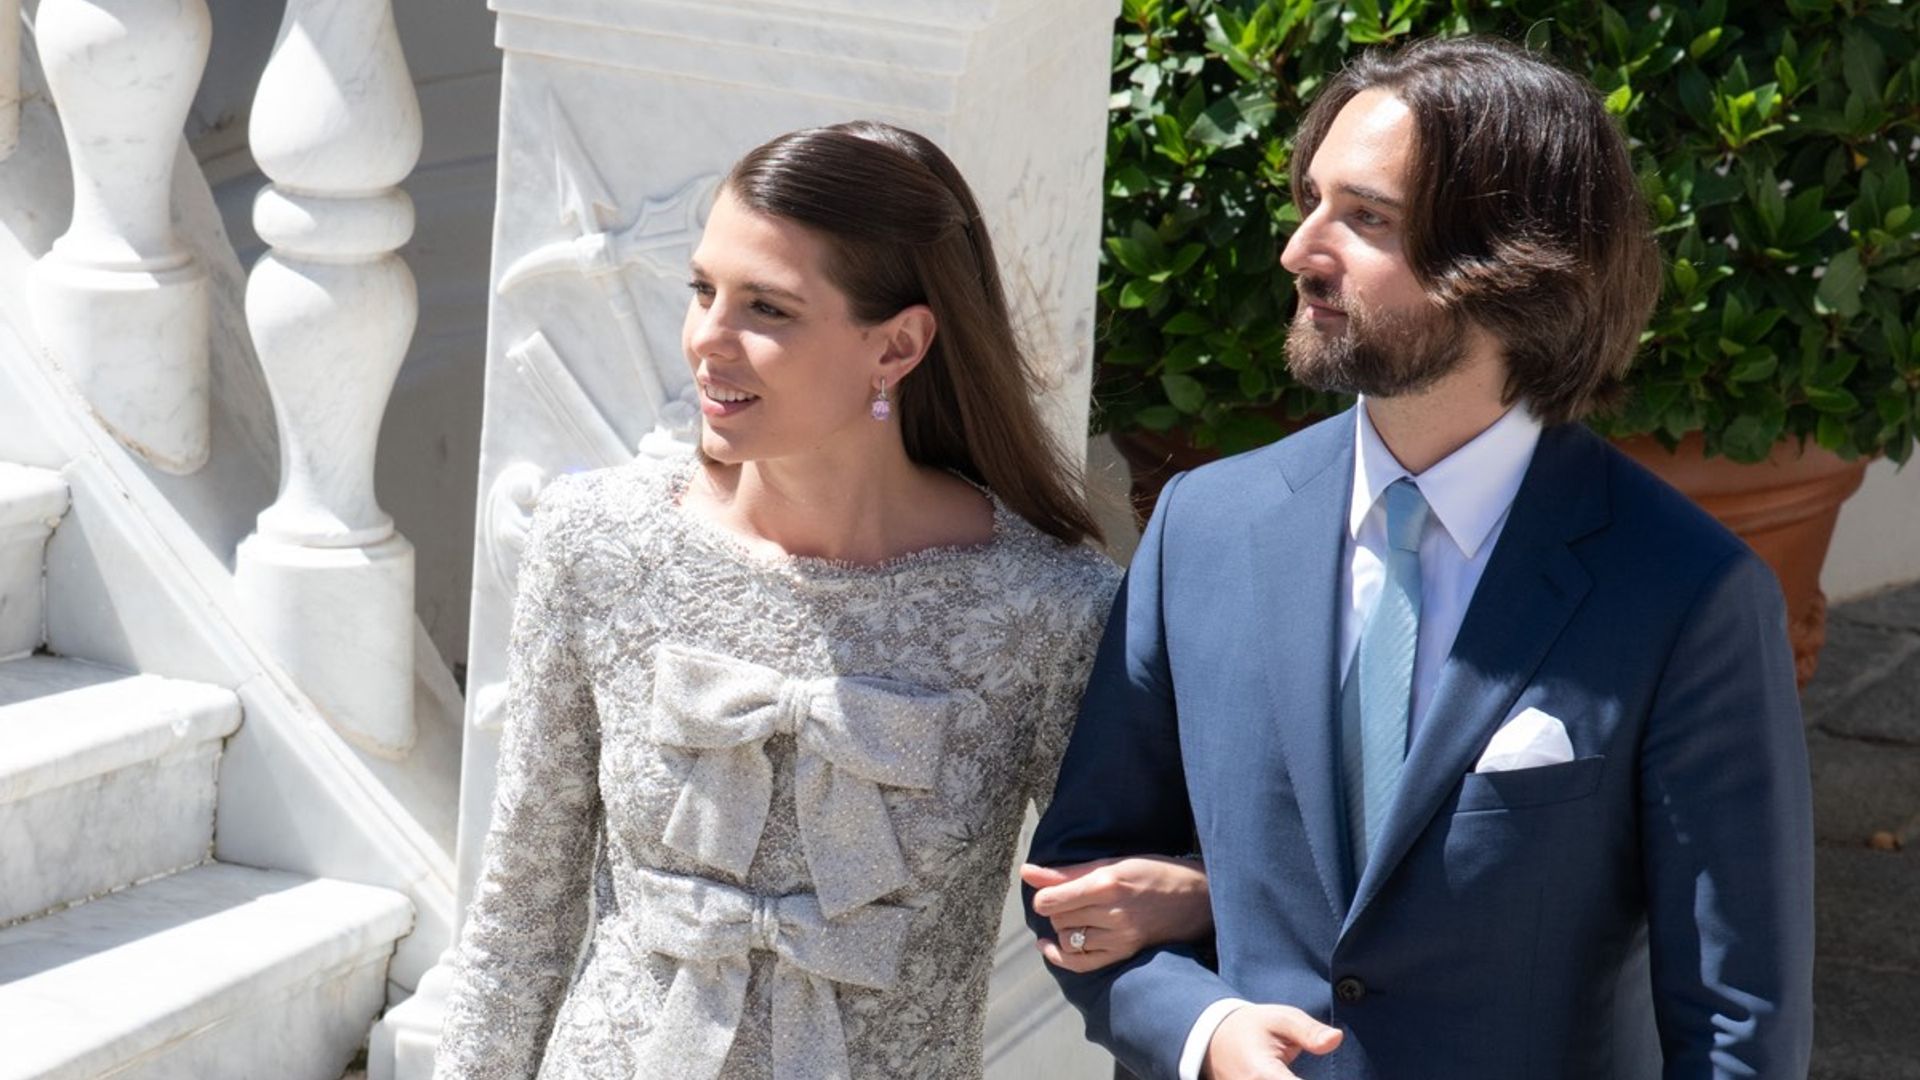 Another Royal Wedding! Monaco's Charlotte Casiraghi is married - see the official photo